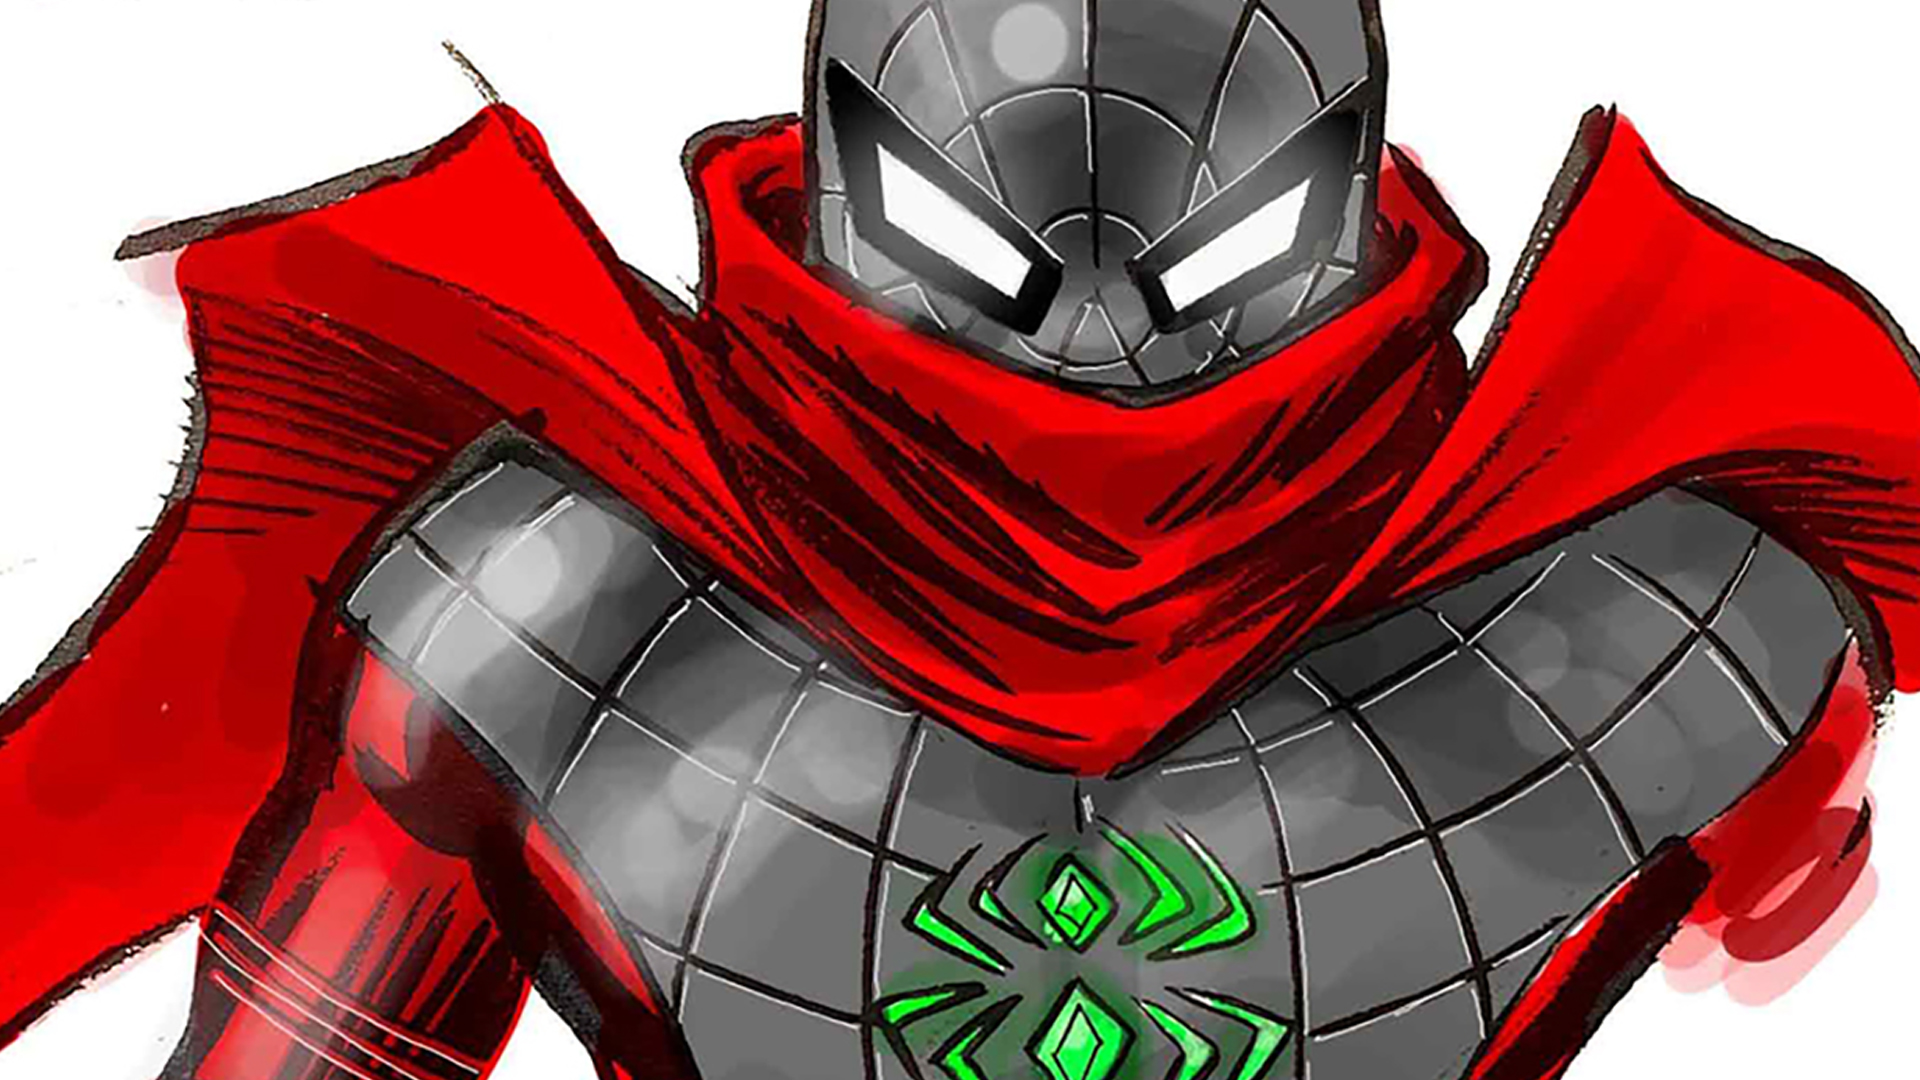 Spider-Man's new magic suit revealed, along with his surprising new connection to Doctor Doom